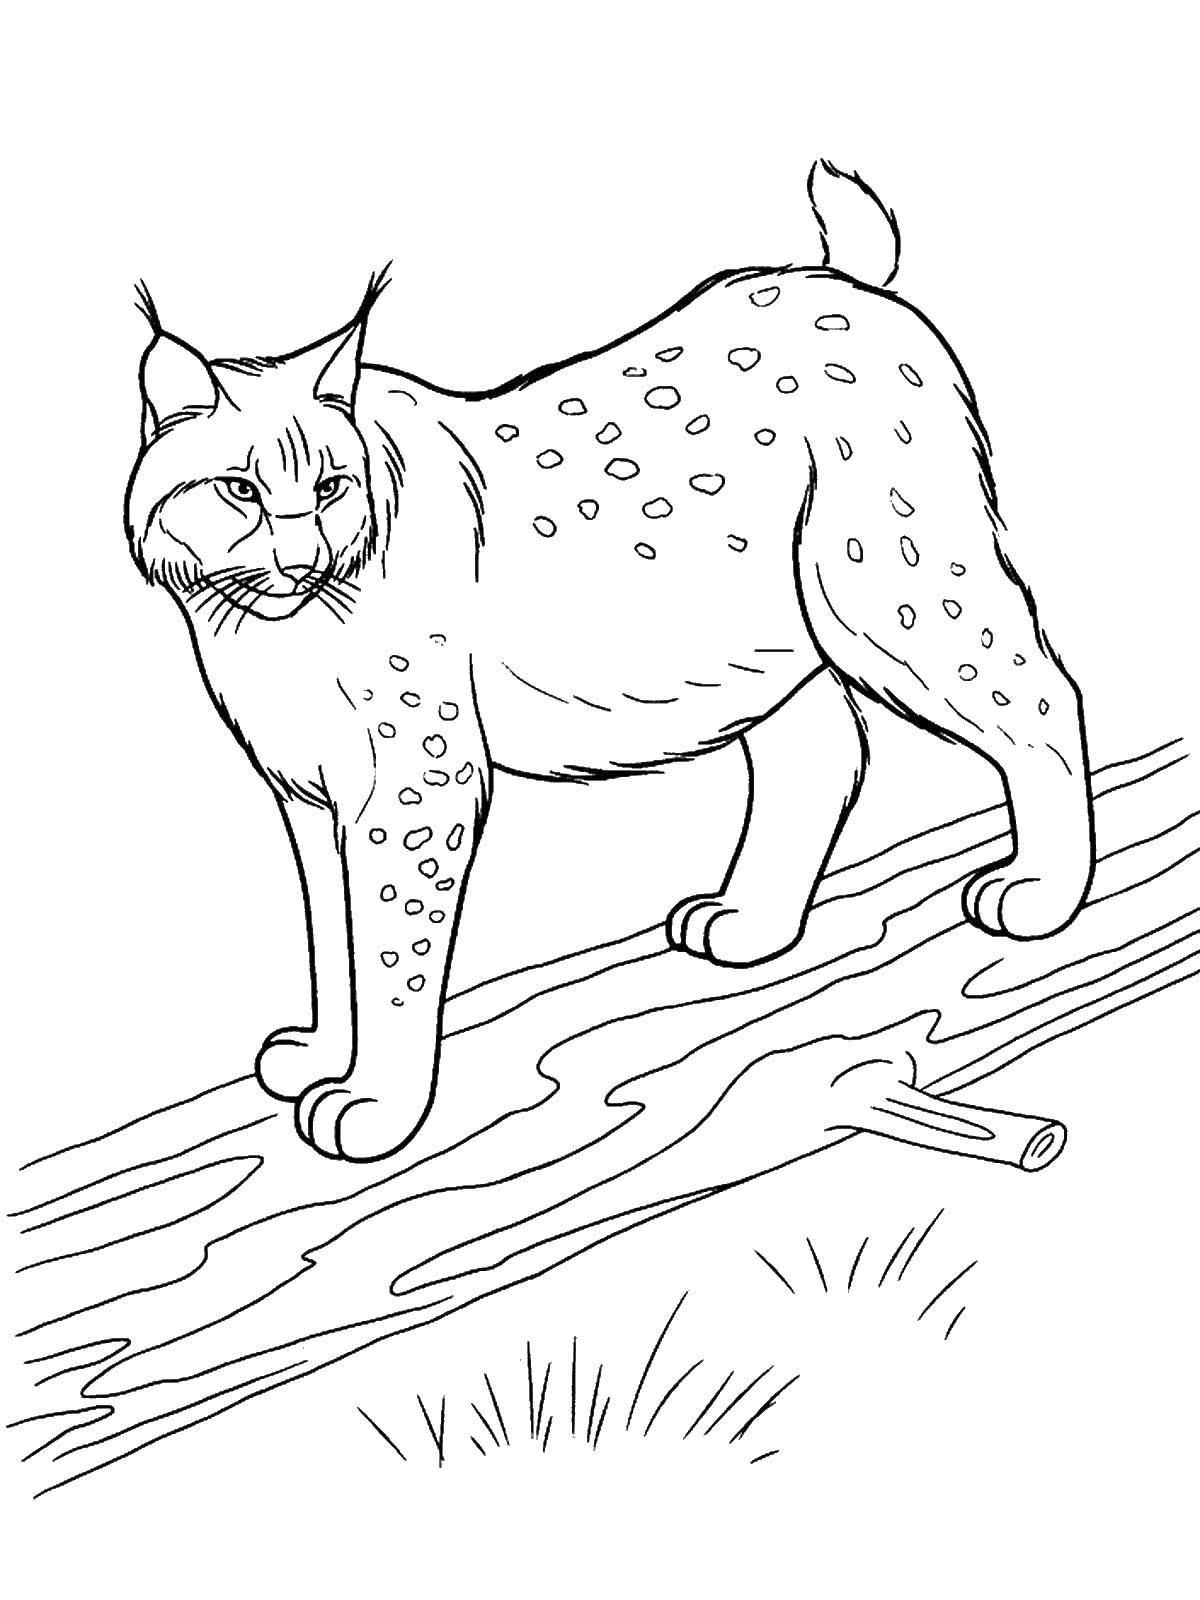 Coloring Lynx. Category wild animals. Tags:  lynx.